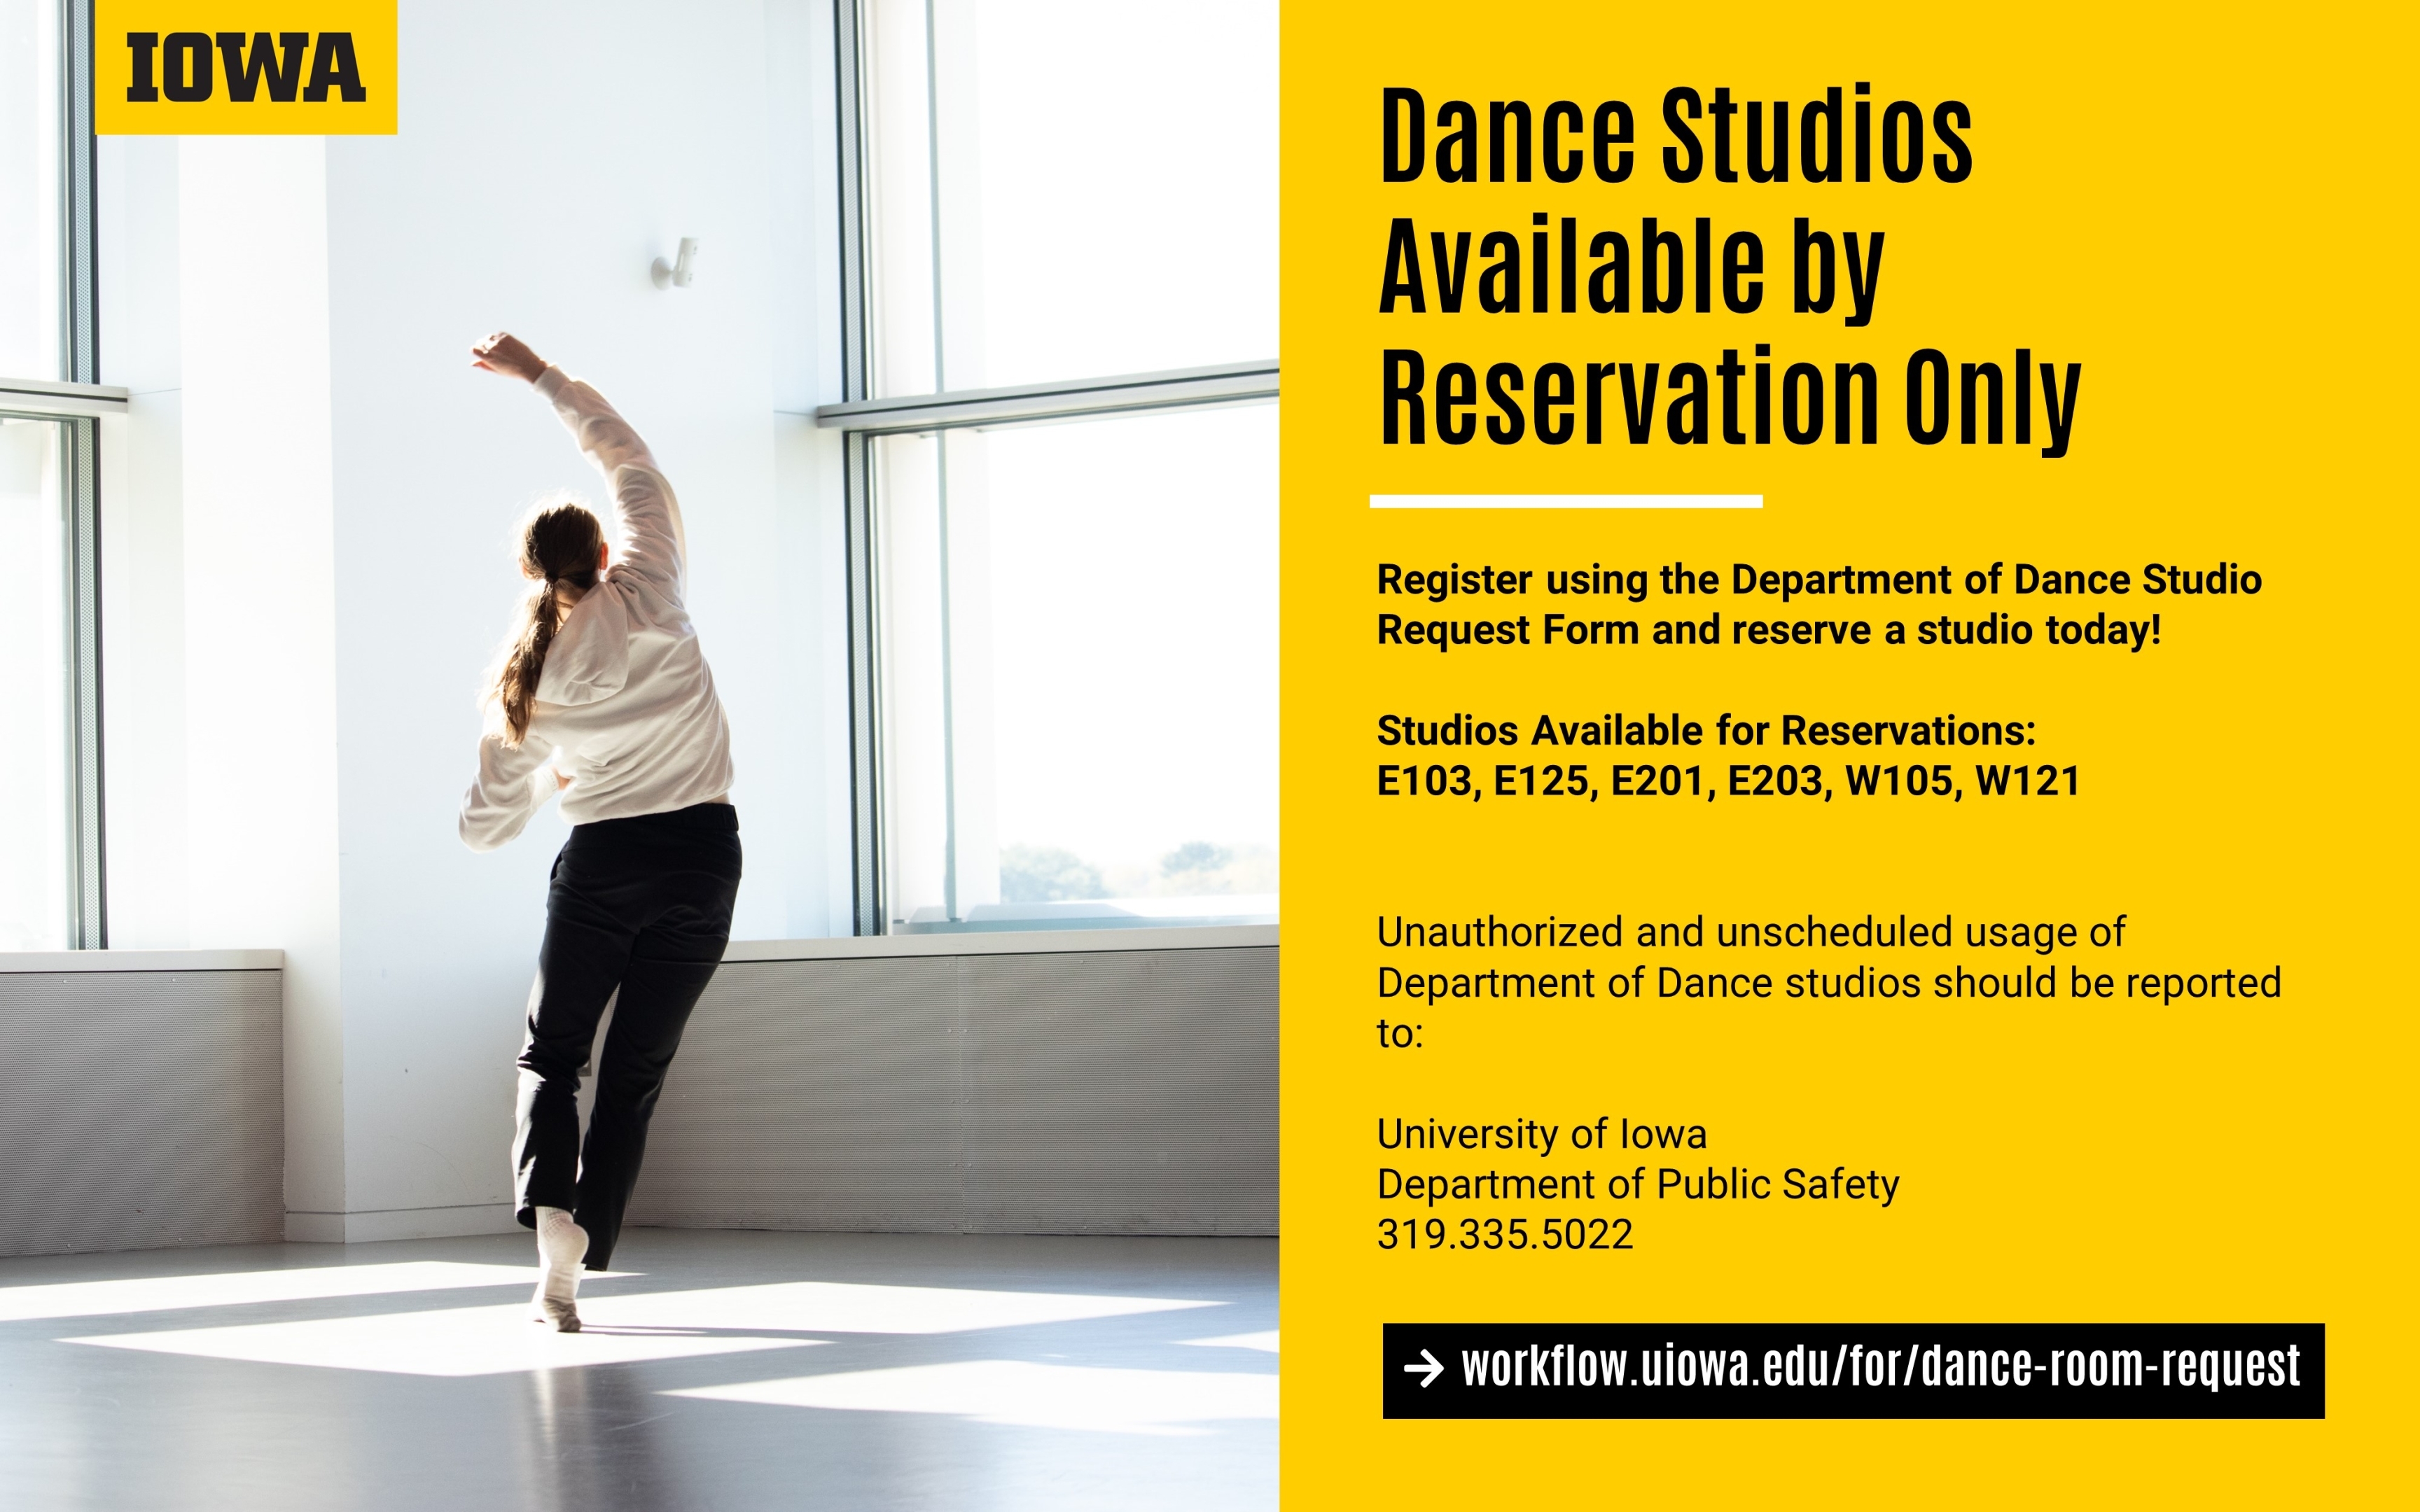 Dance Studios available by reservation only, workflow.uiowa.edu/for/dance-room-request